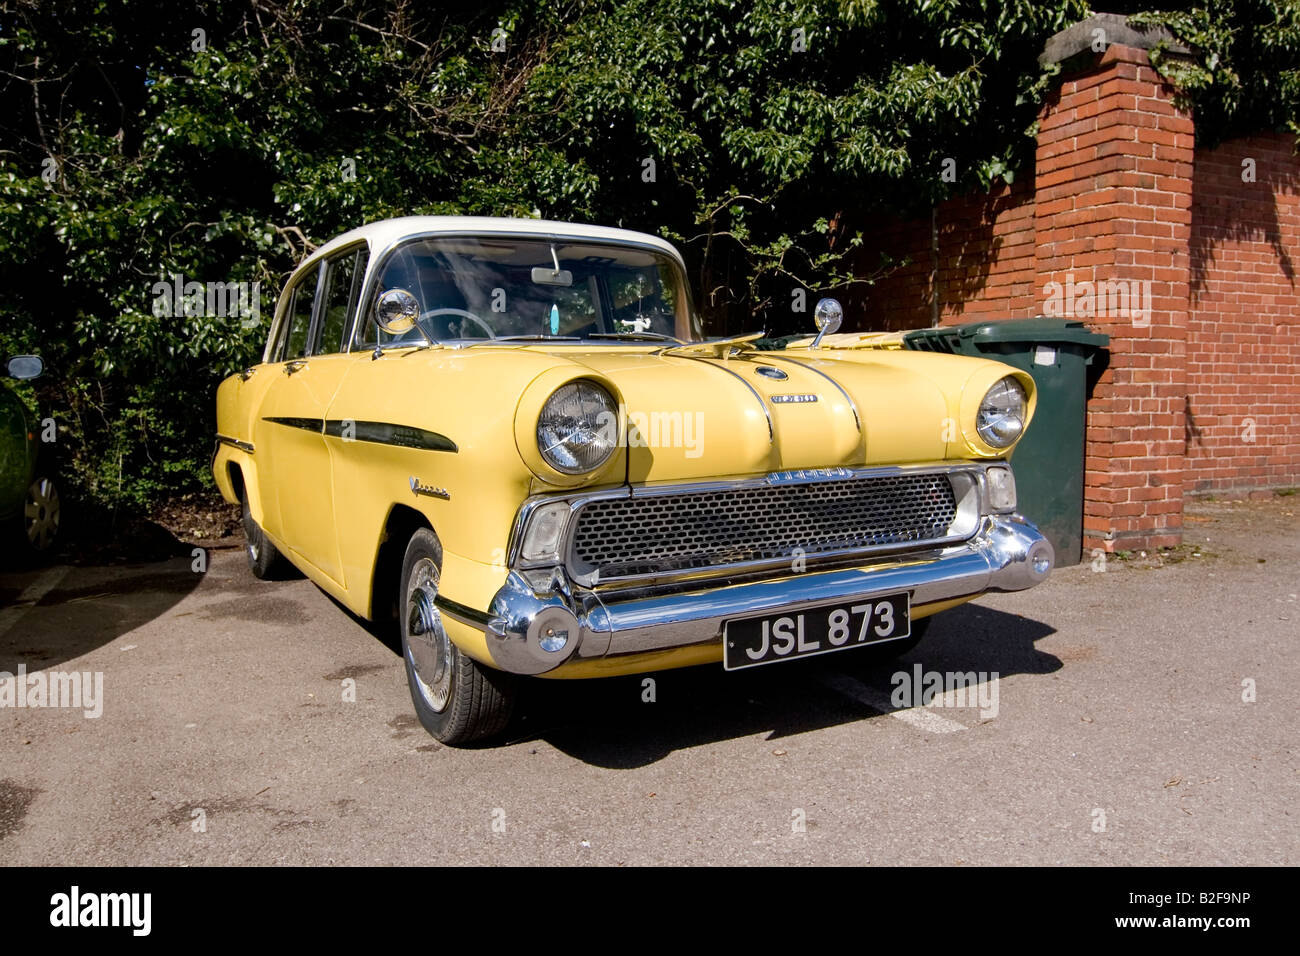 Old-fashioned car parked in driveway, Vauxhall Victor vintage saloon car Stock Photo